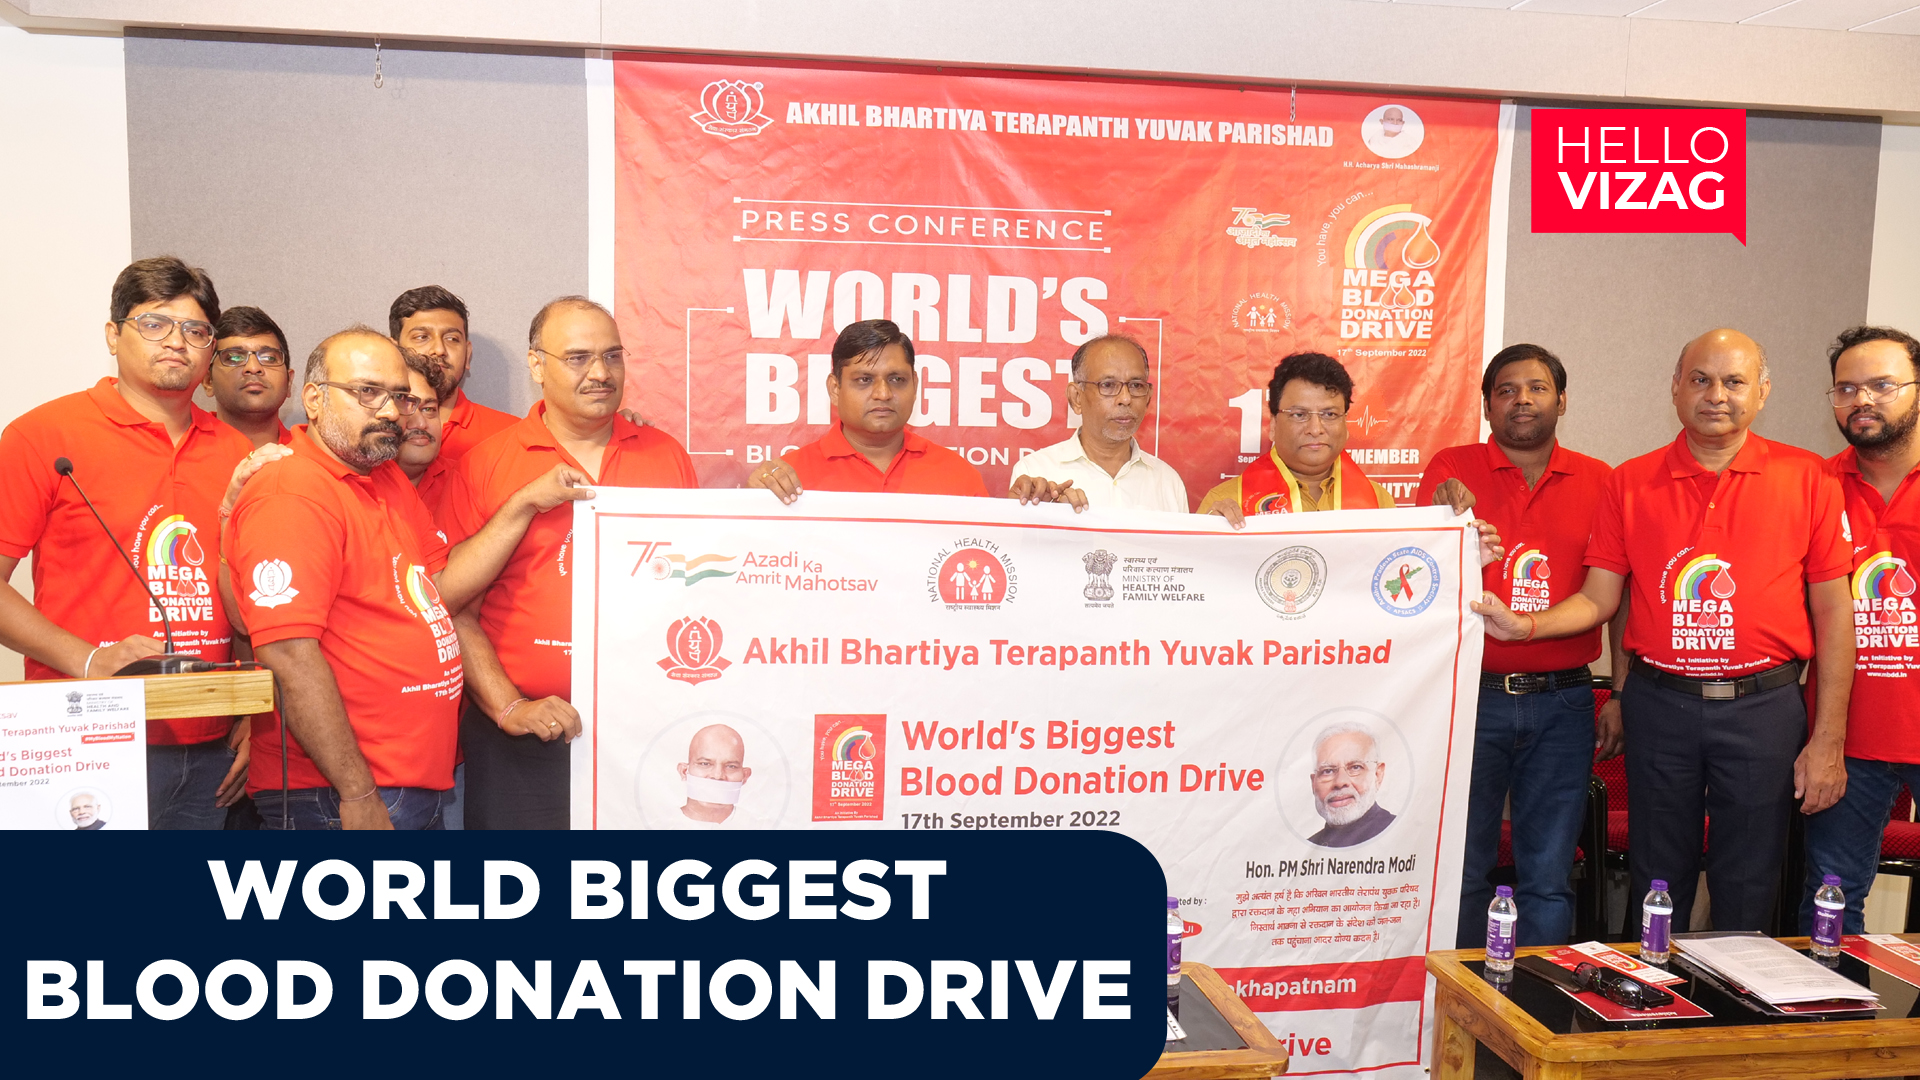 World's Biggest Blood Donation Drive Nation Wide Blood Donation Drive on 17th September | Hellovizag